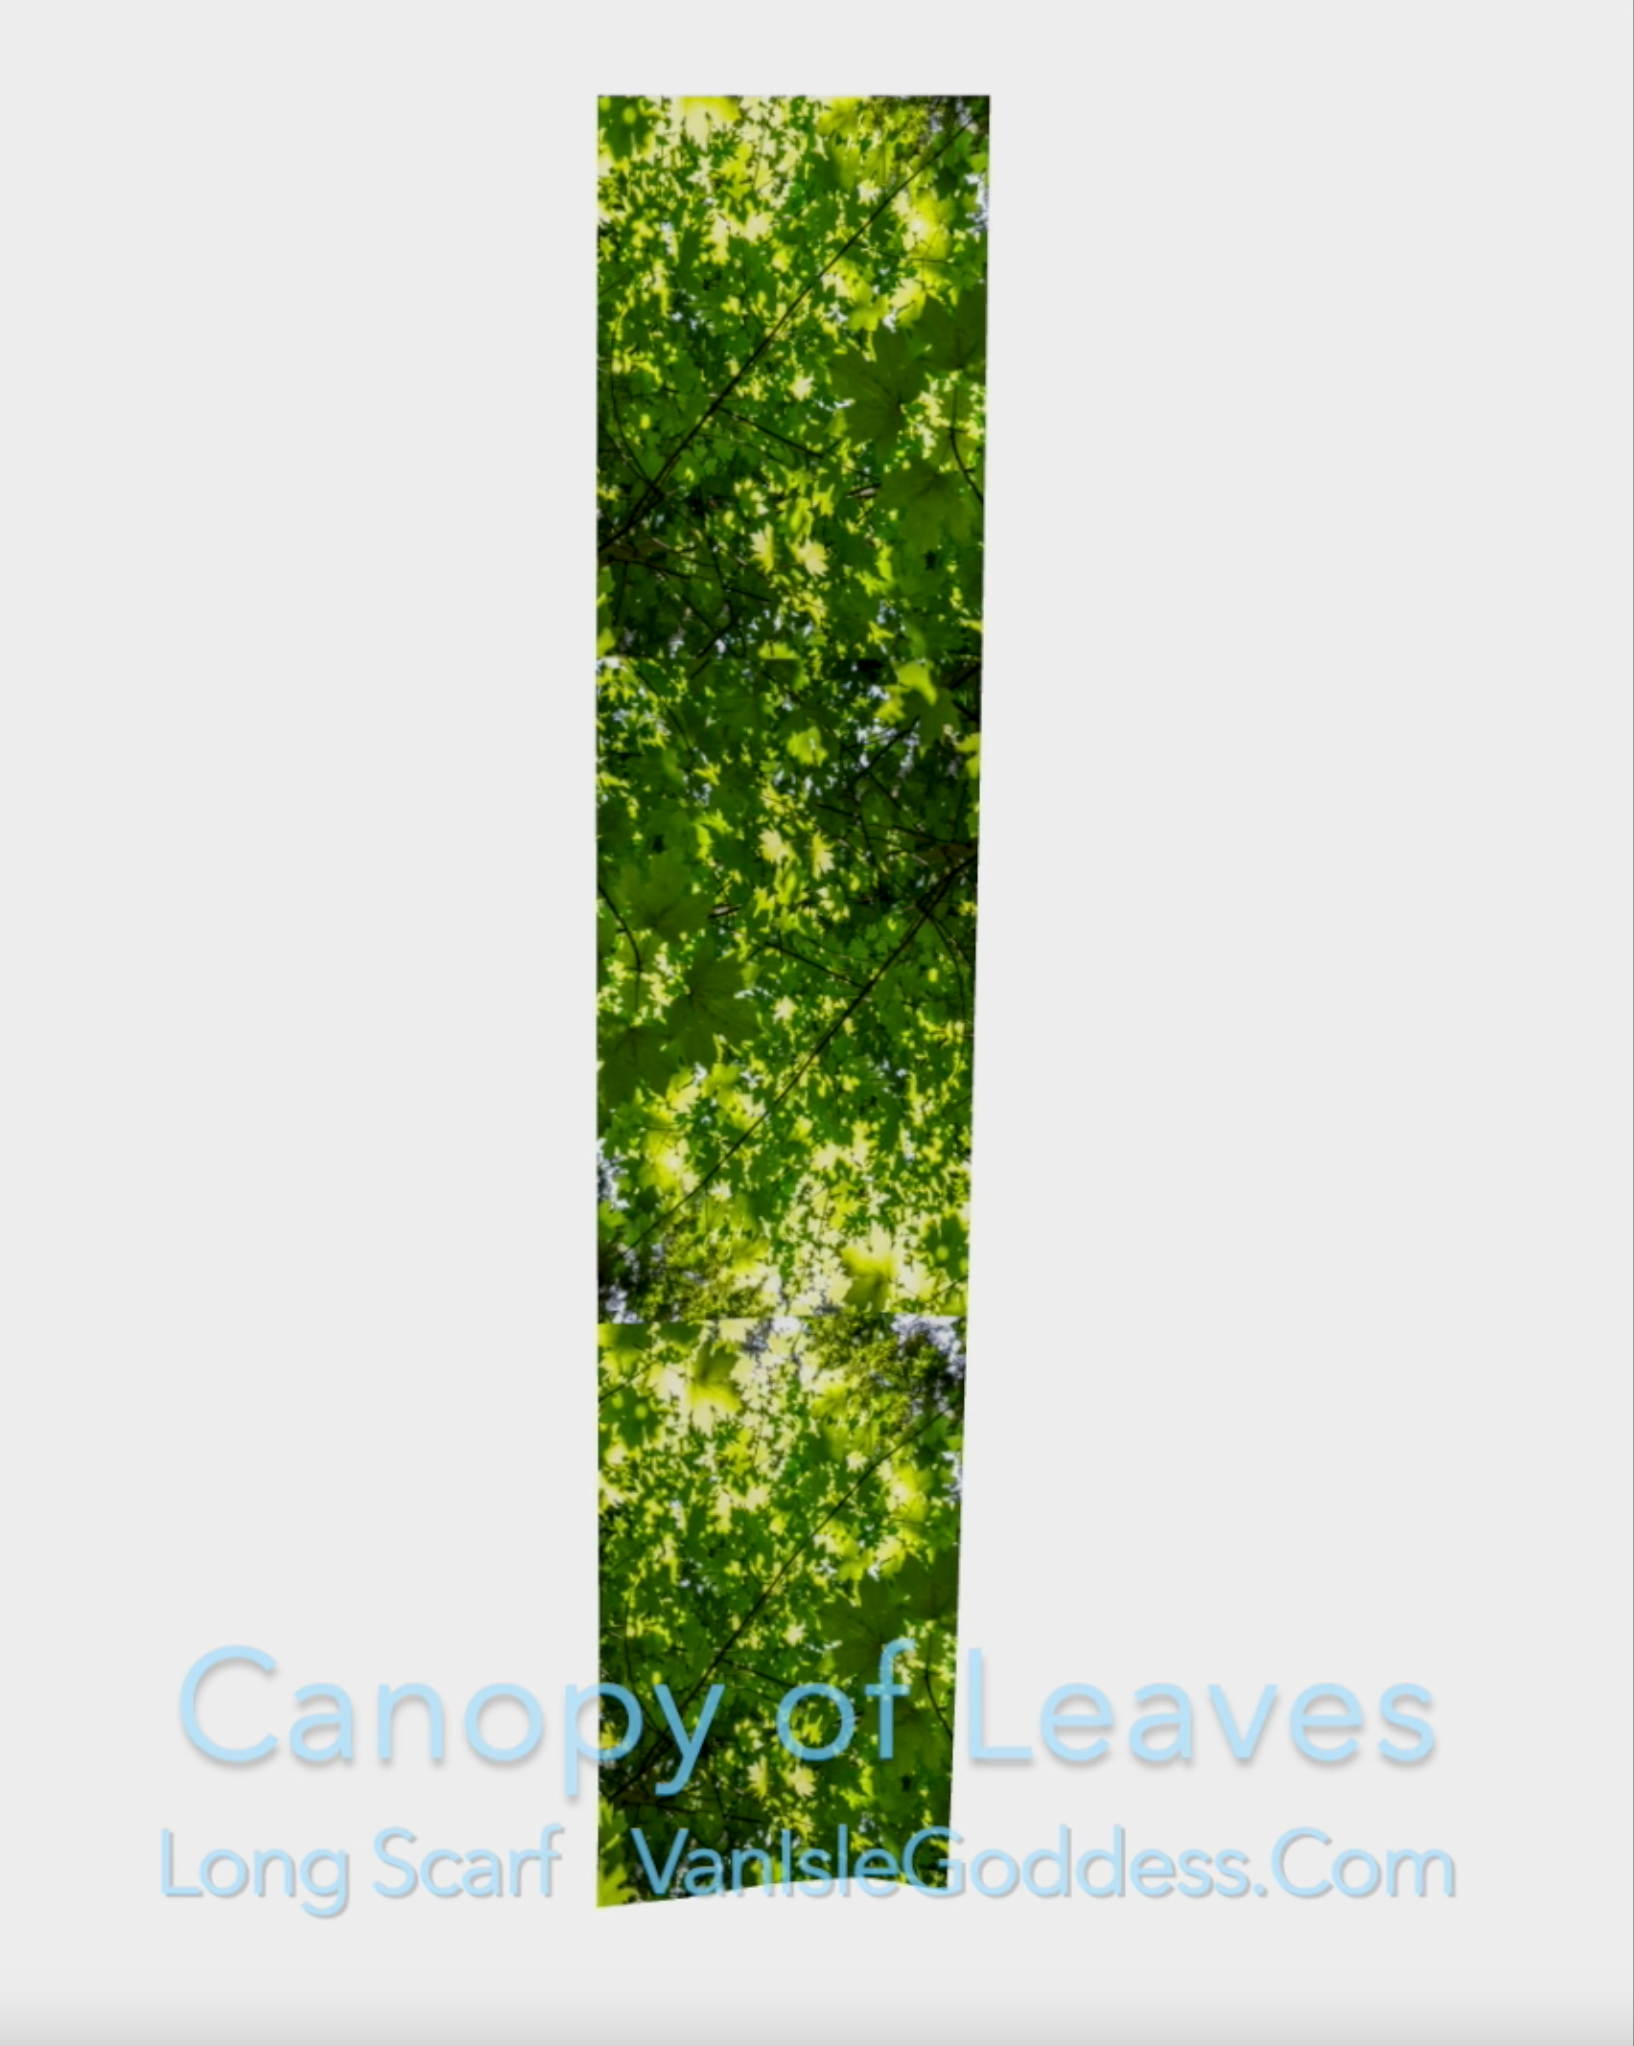 Canopy of leaves long scarf shown in full length.